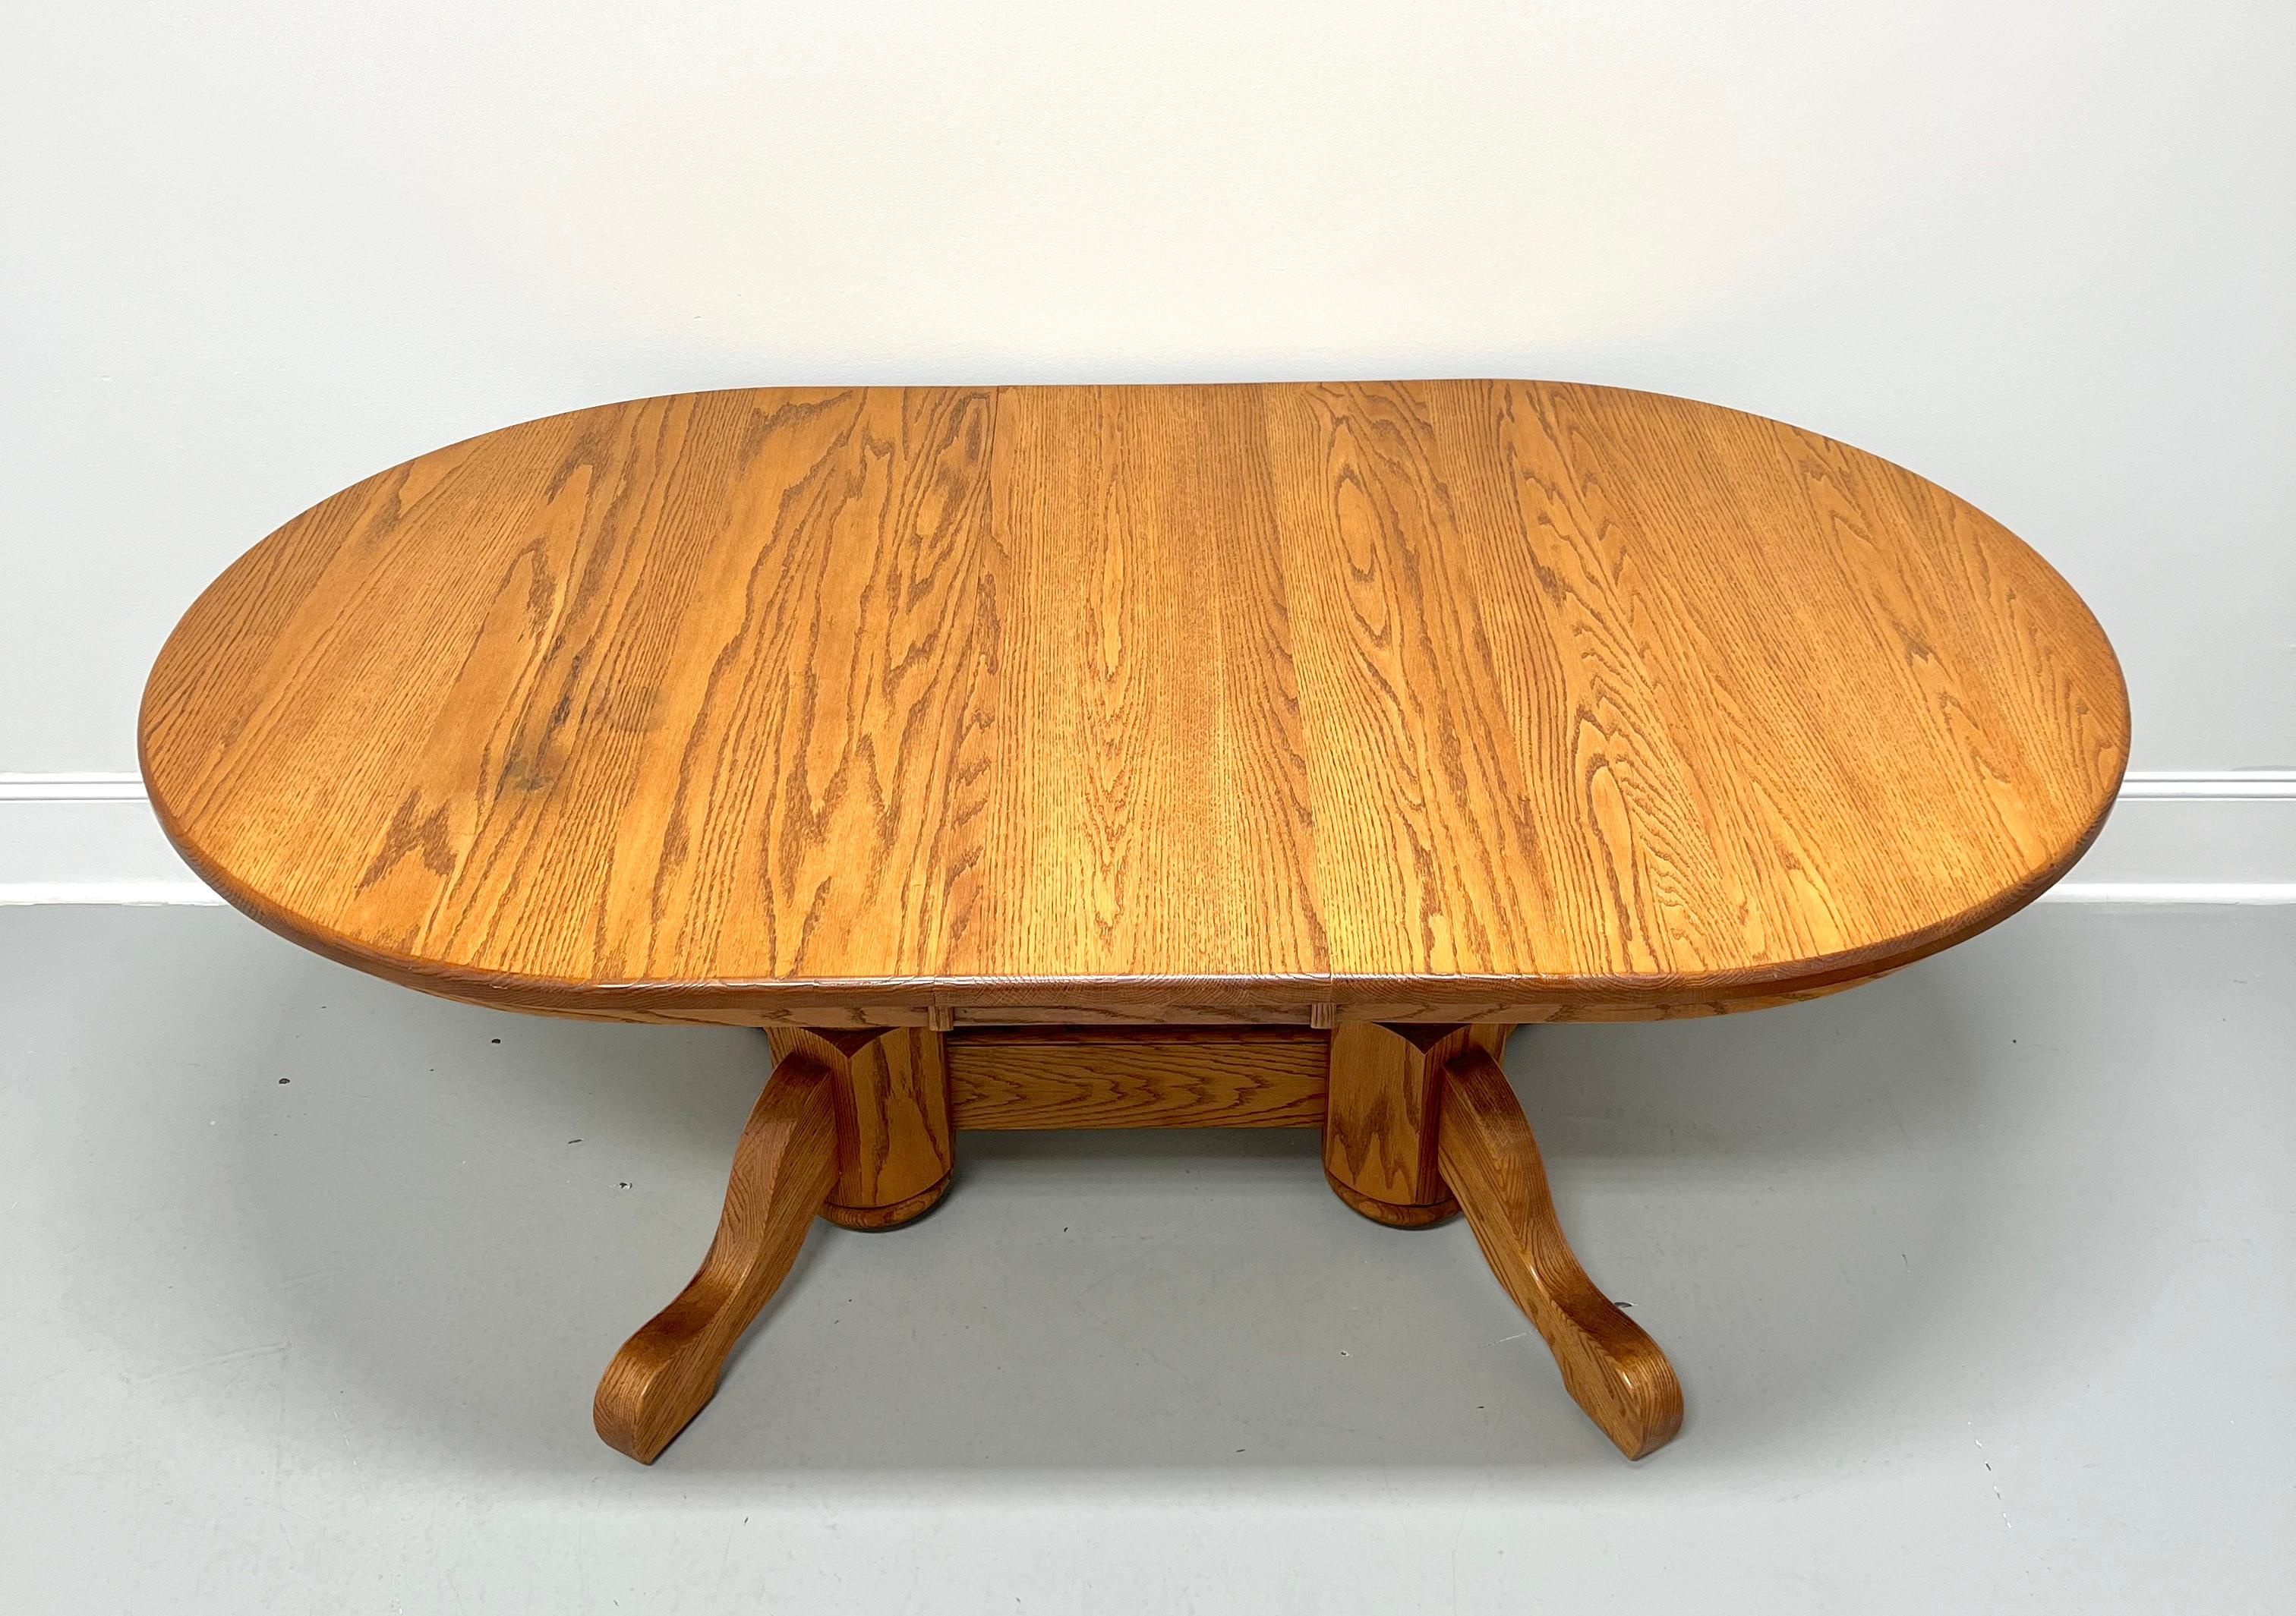 A handcrafted oblong dining table in the Rockford style by Amish craftsmen. Solid oak, oval shaped top with a bullnose edge, rounded smooth apron with accents, single trestle pedestal base with large turned supports joined by center turned spindles,